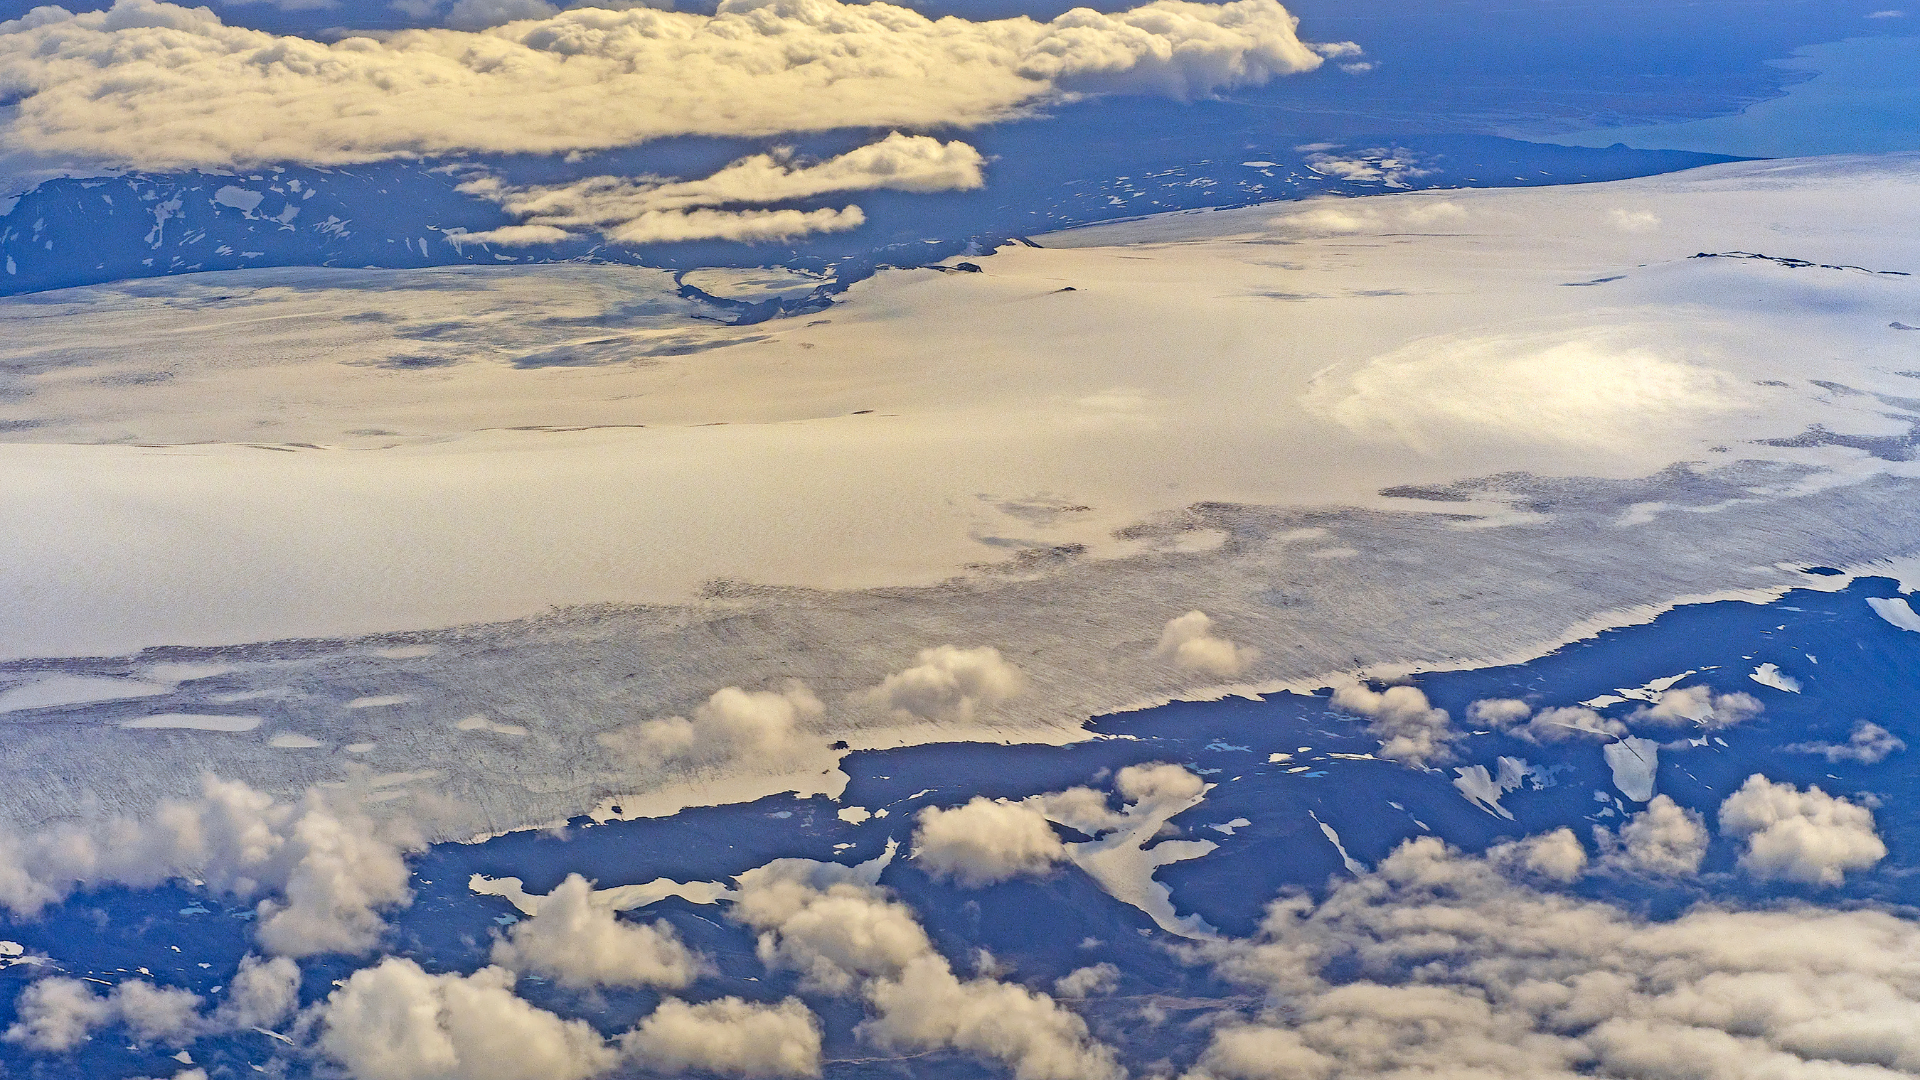 langjokull glaciers in iceland from above